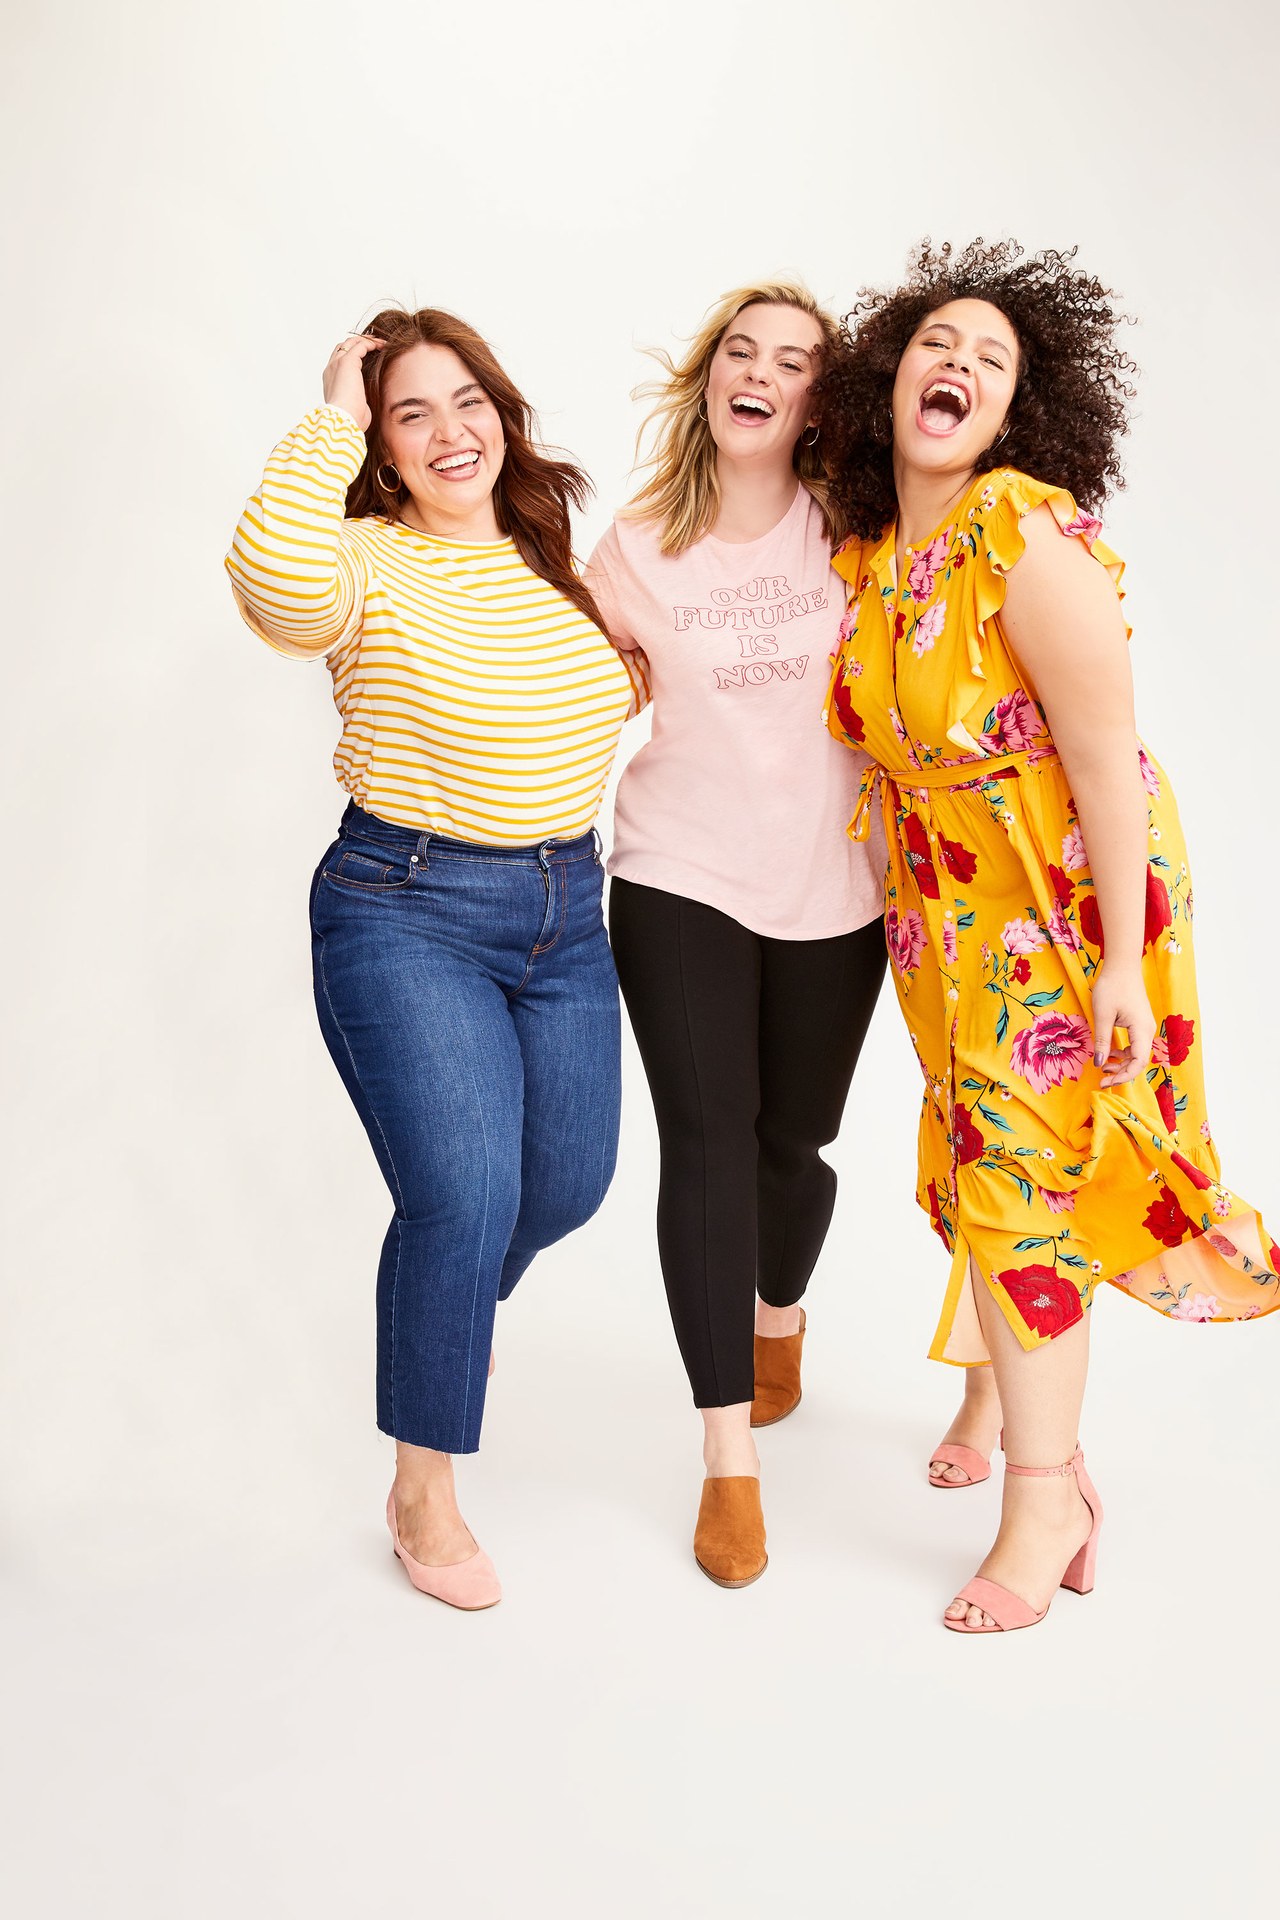 Old Navy Plus Sizes Will Be Available In Over 75 Stores